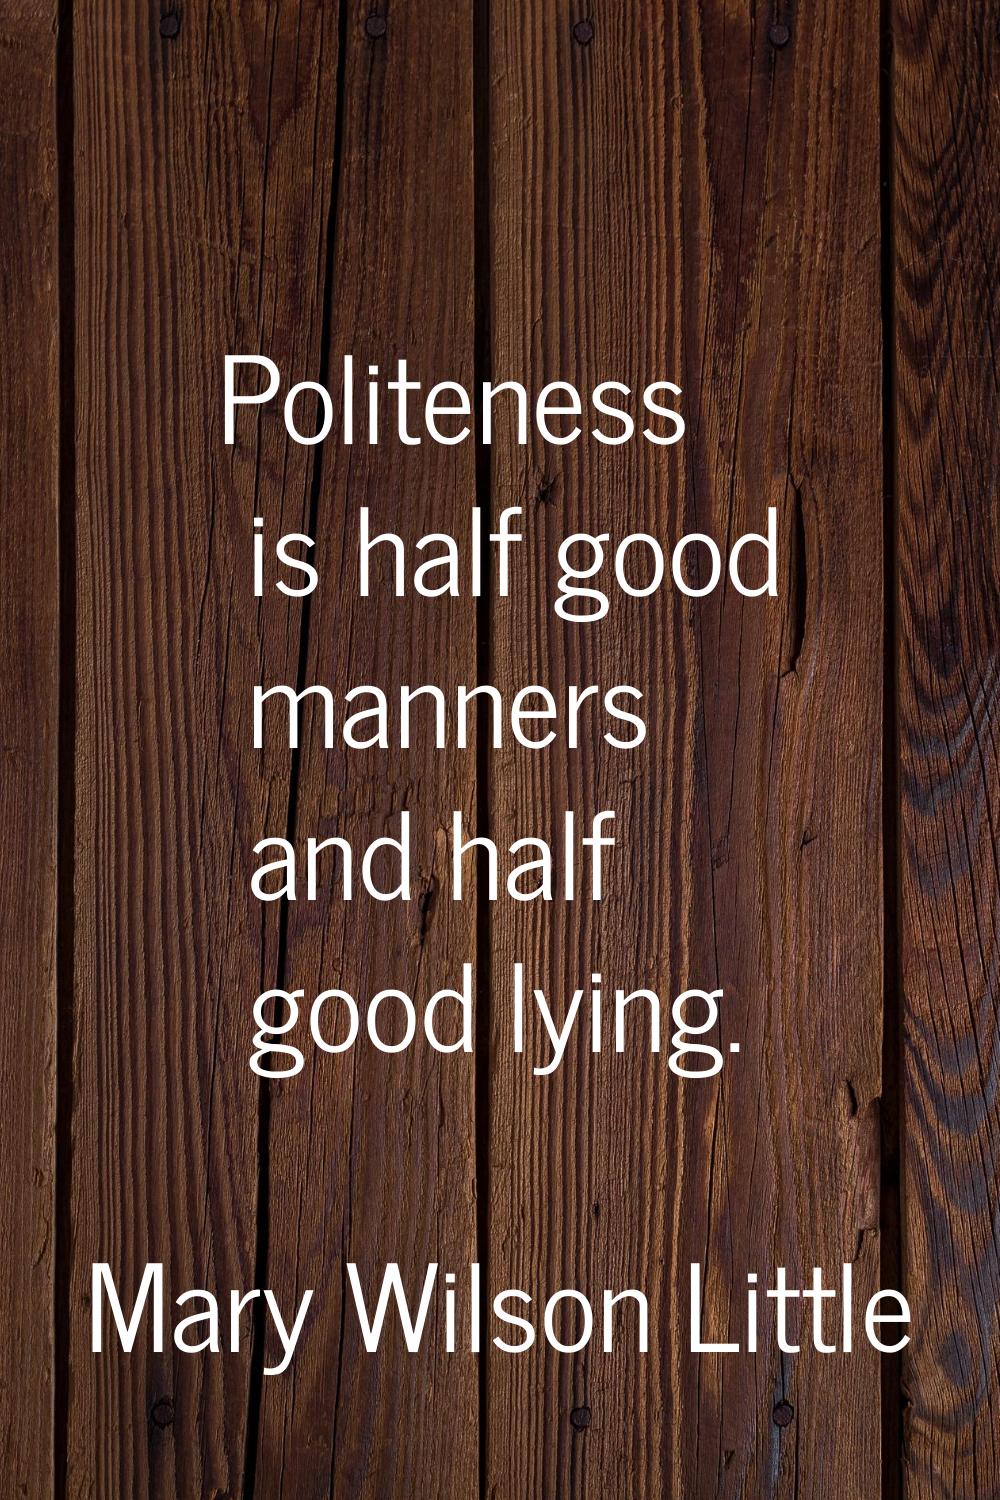 Politeness is half good manners and half good lying.